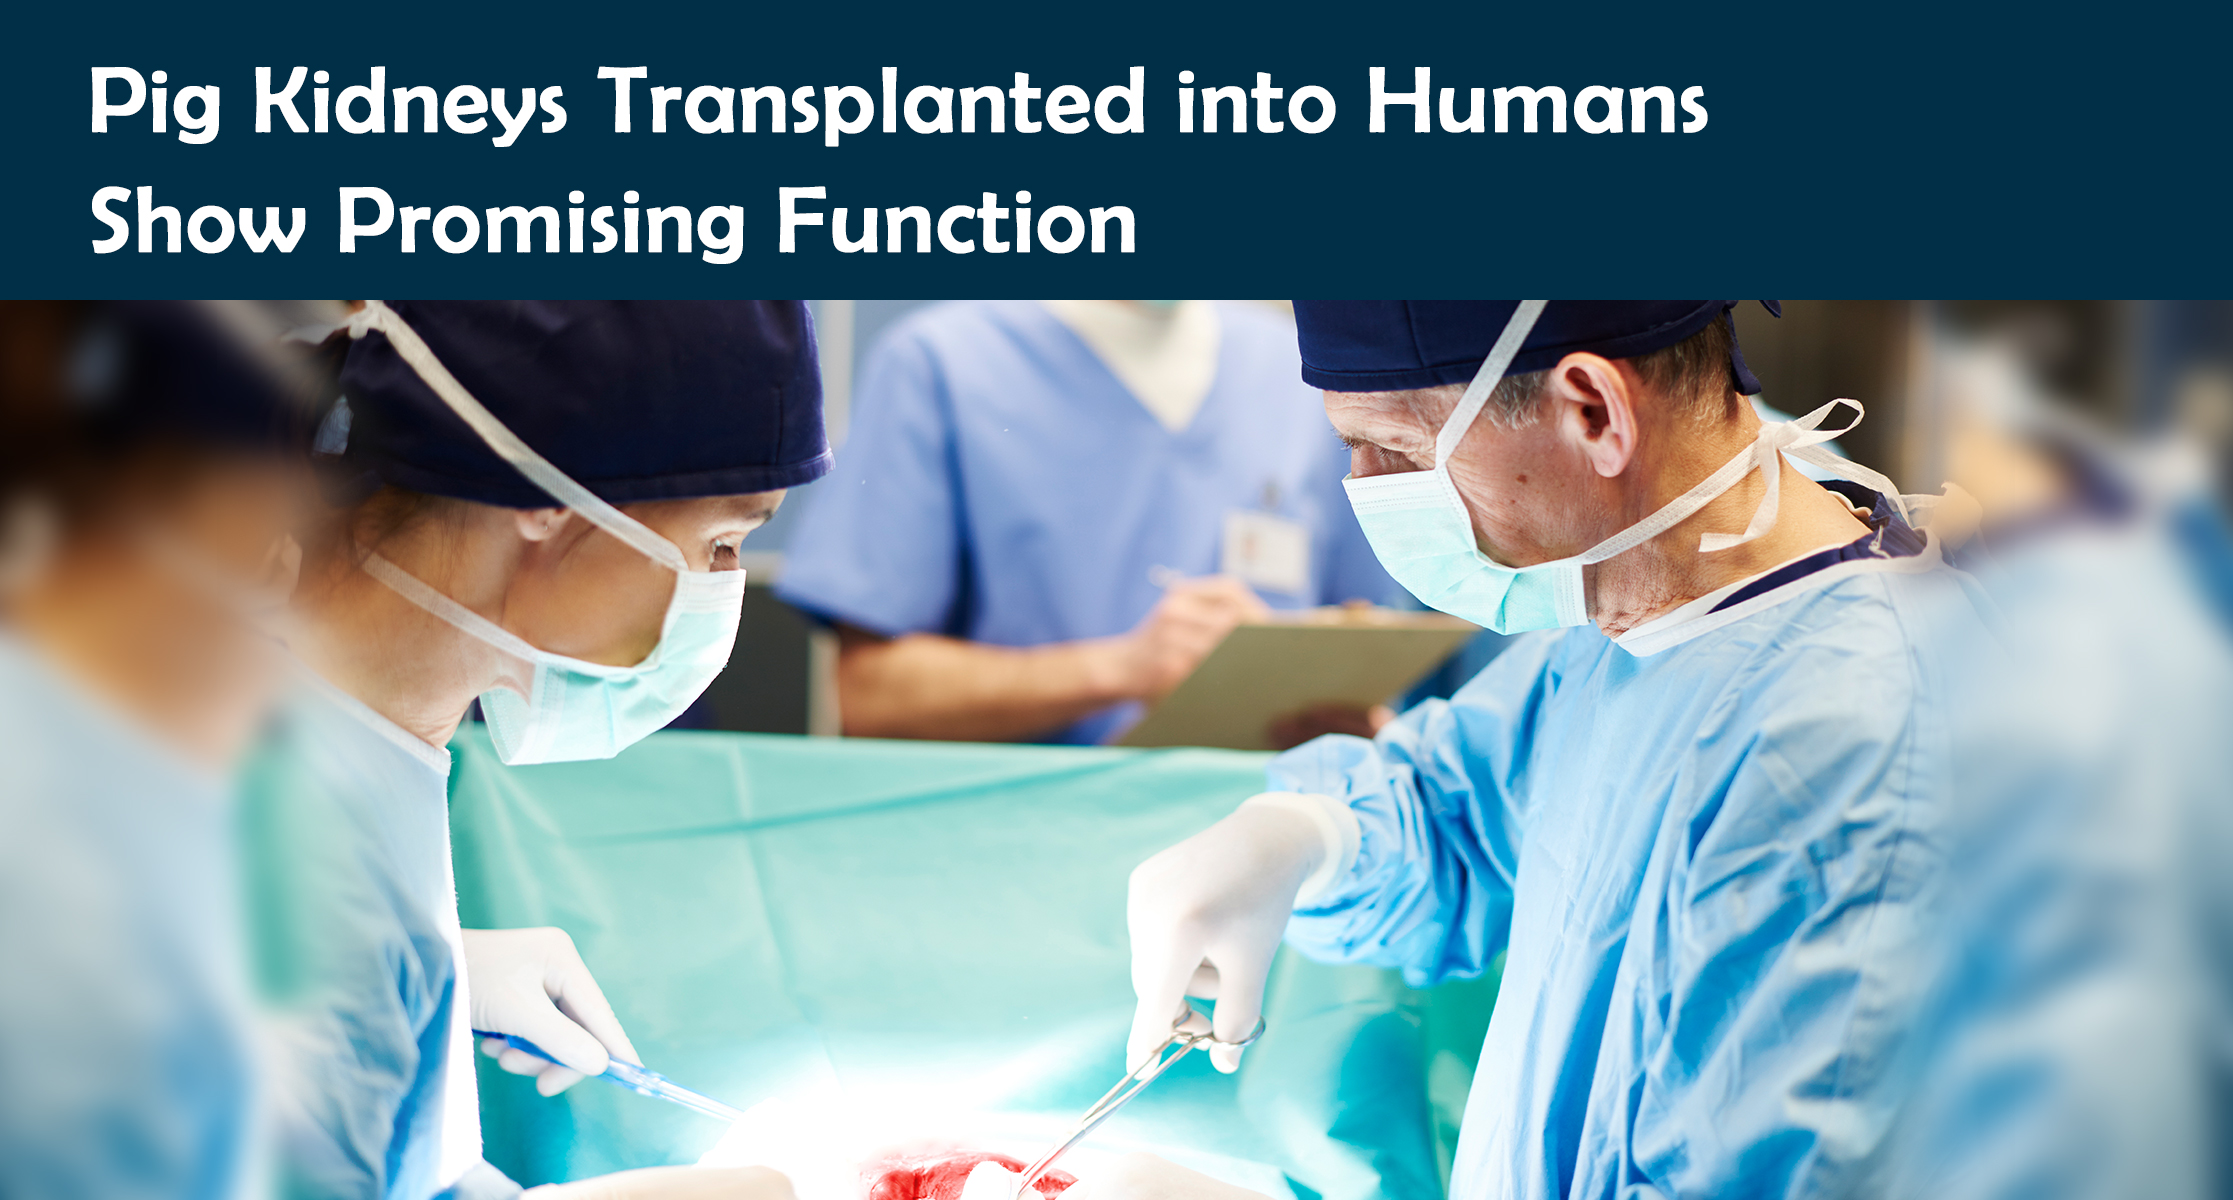 Pig Kidneys Transplanted into Humans Show Promising Function